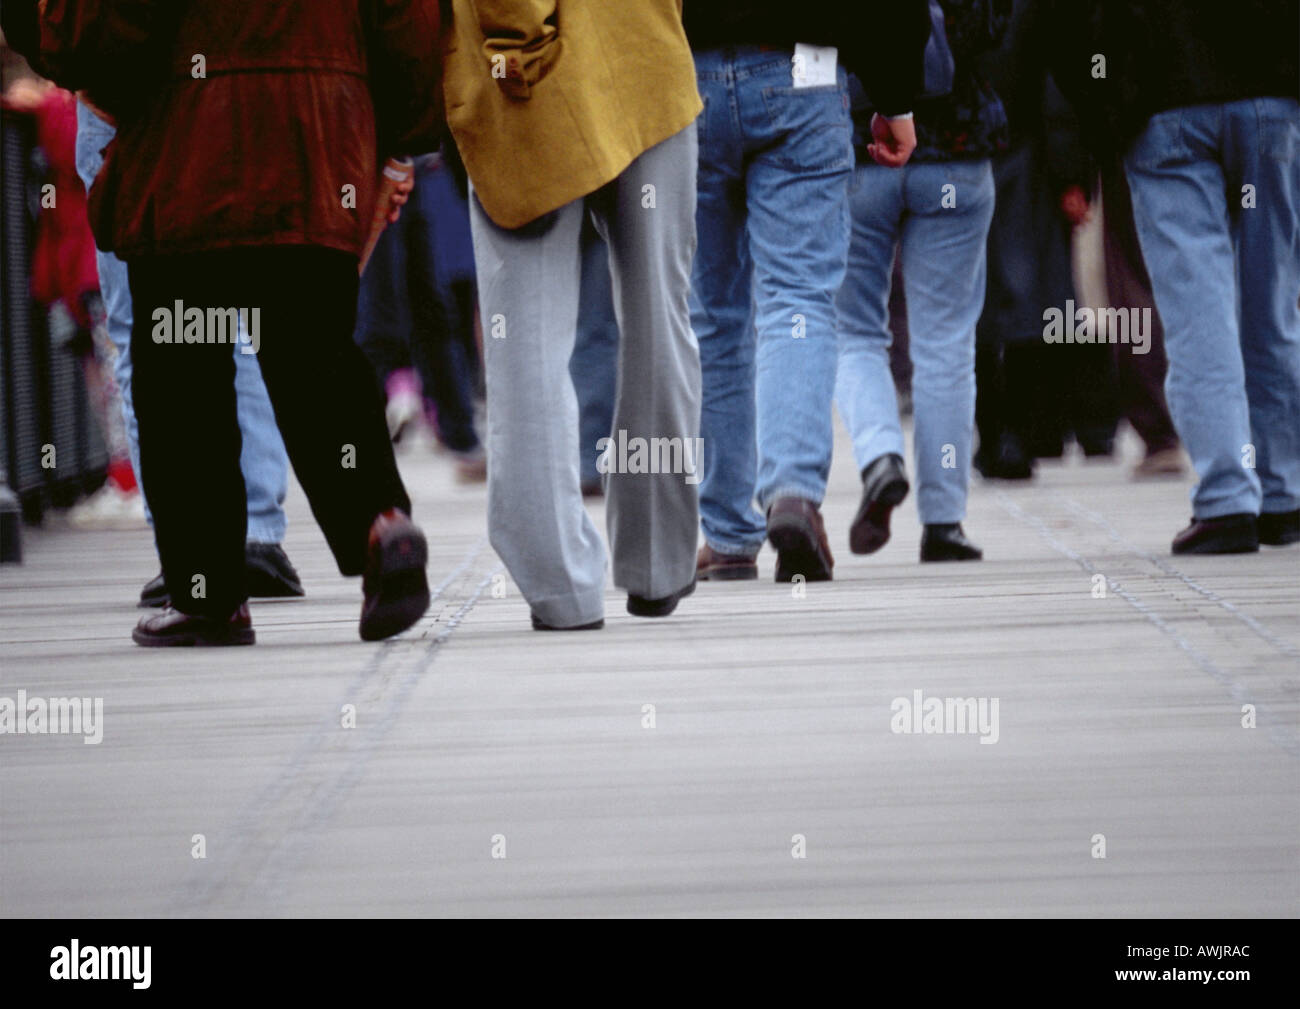 Crowd of people walking on sidewalk, cropped view, low angle Stock Photo